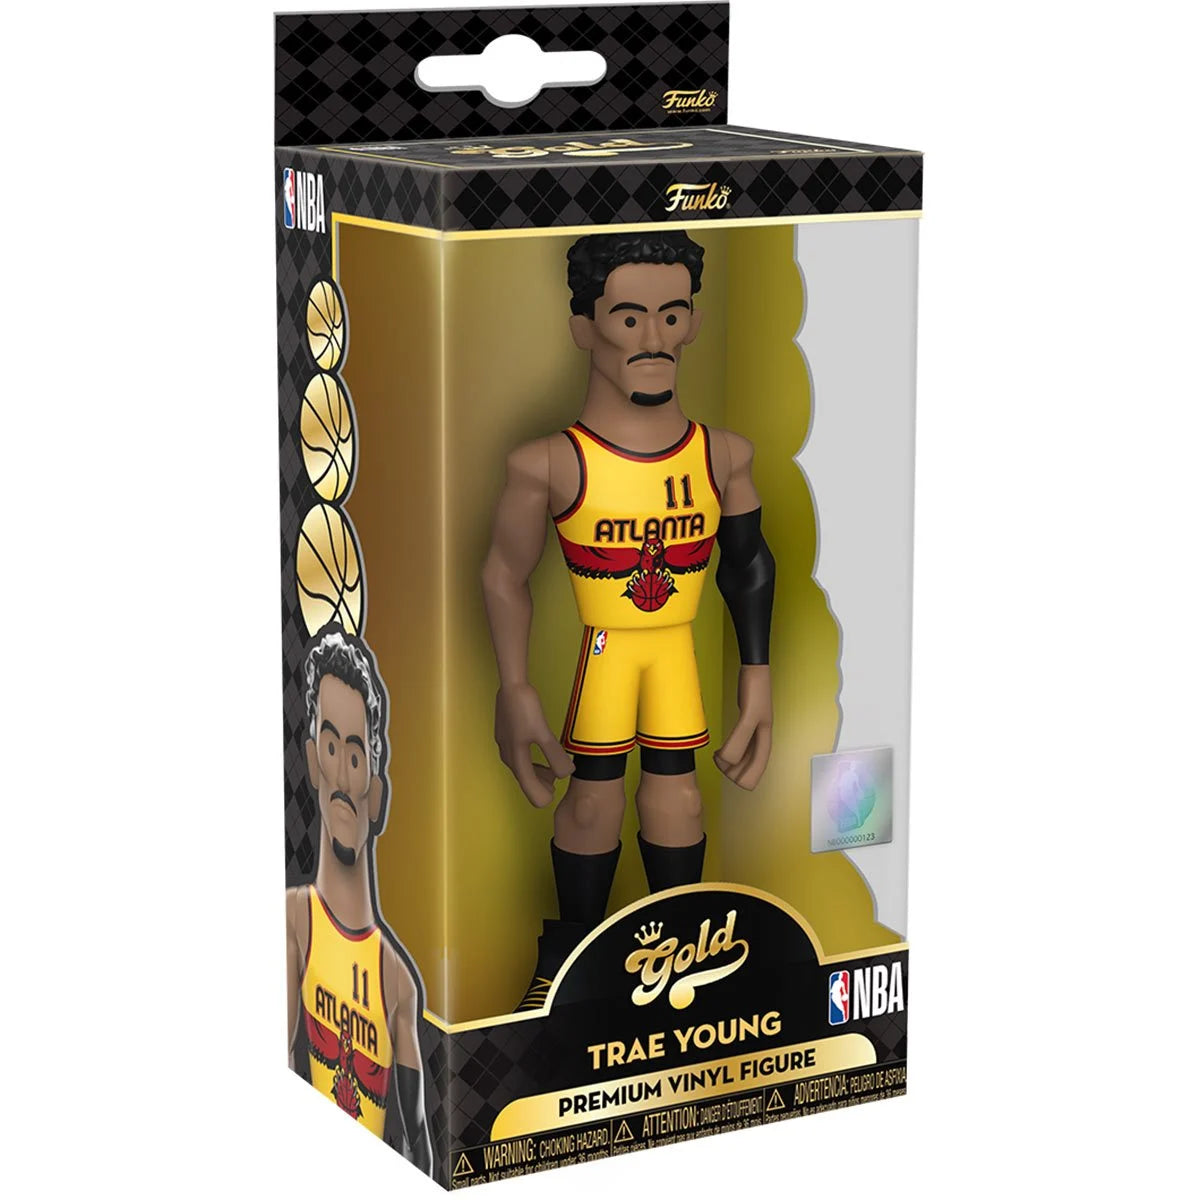 Trae Young Hawks NBA 5-Inch Funko Vinyl Gold Figure w/ Chance of chase!